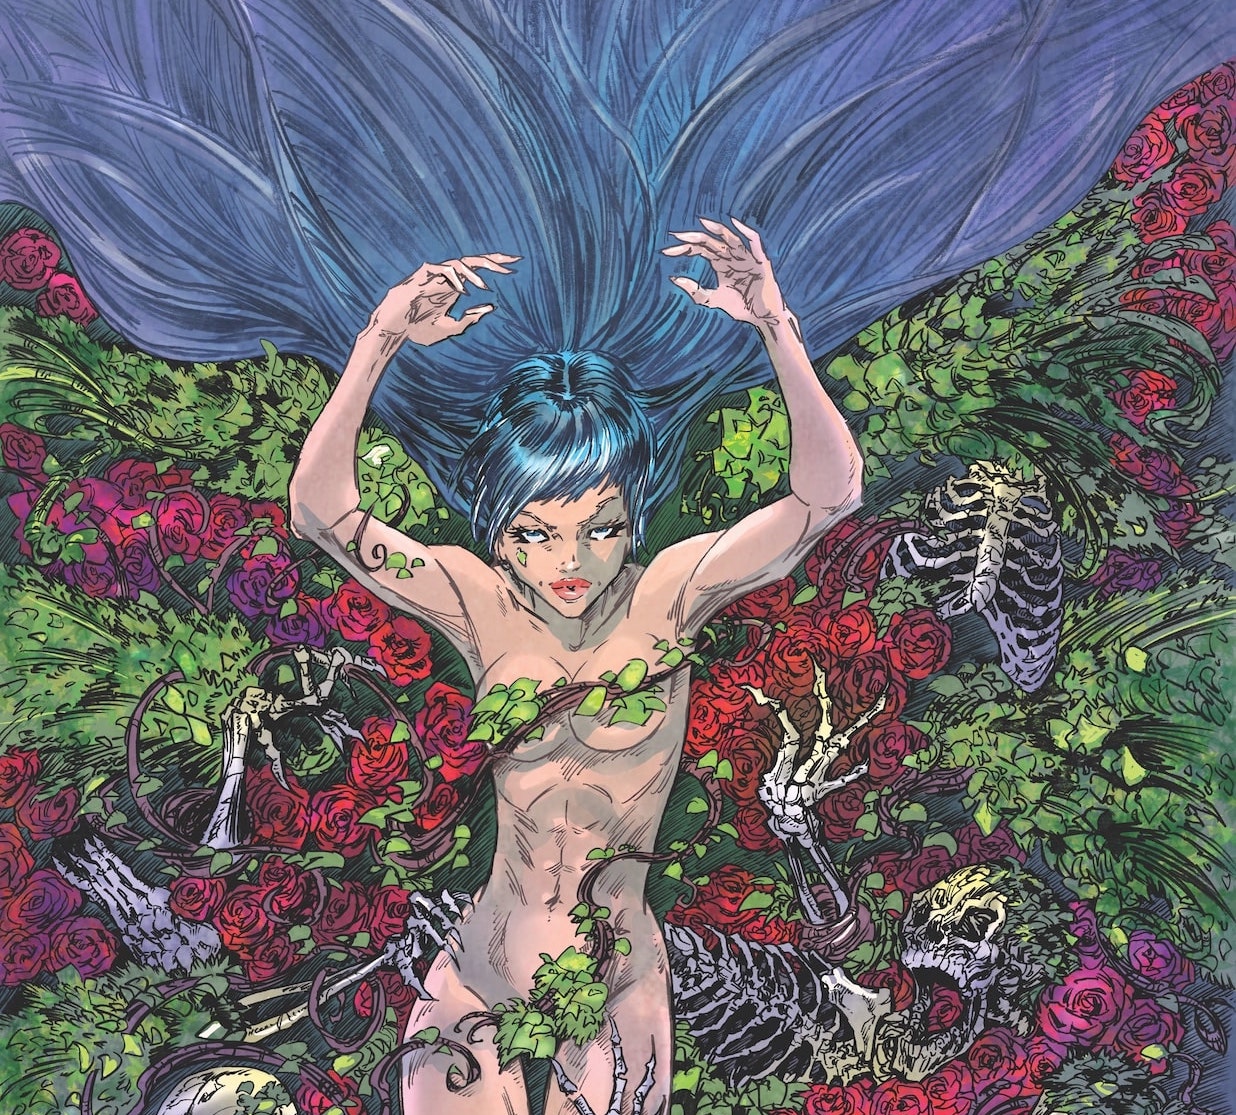 AfterShock First Look: Midnight Rose by Jim Starlin